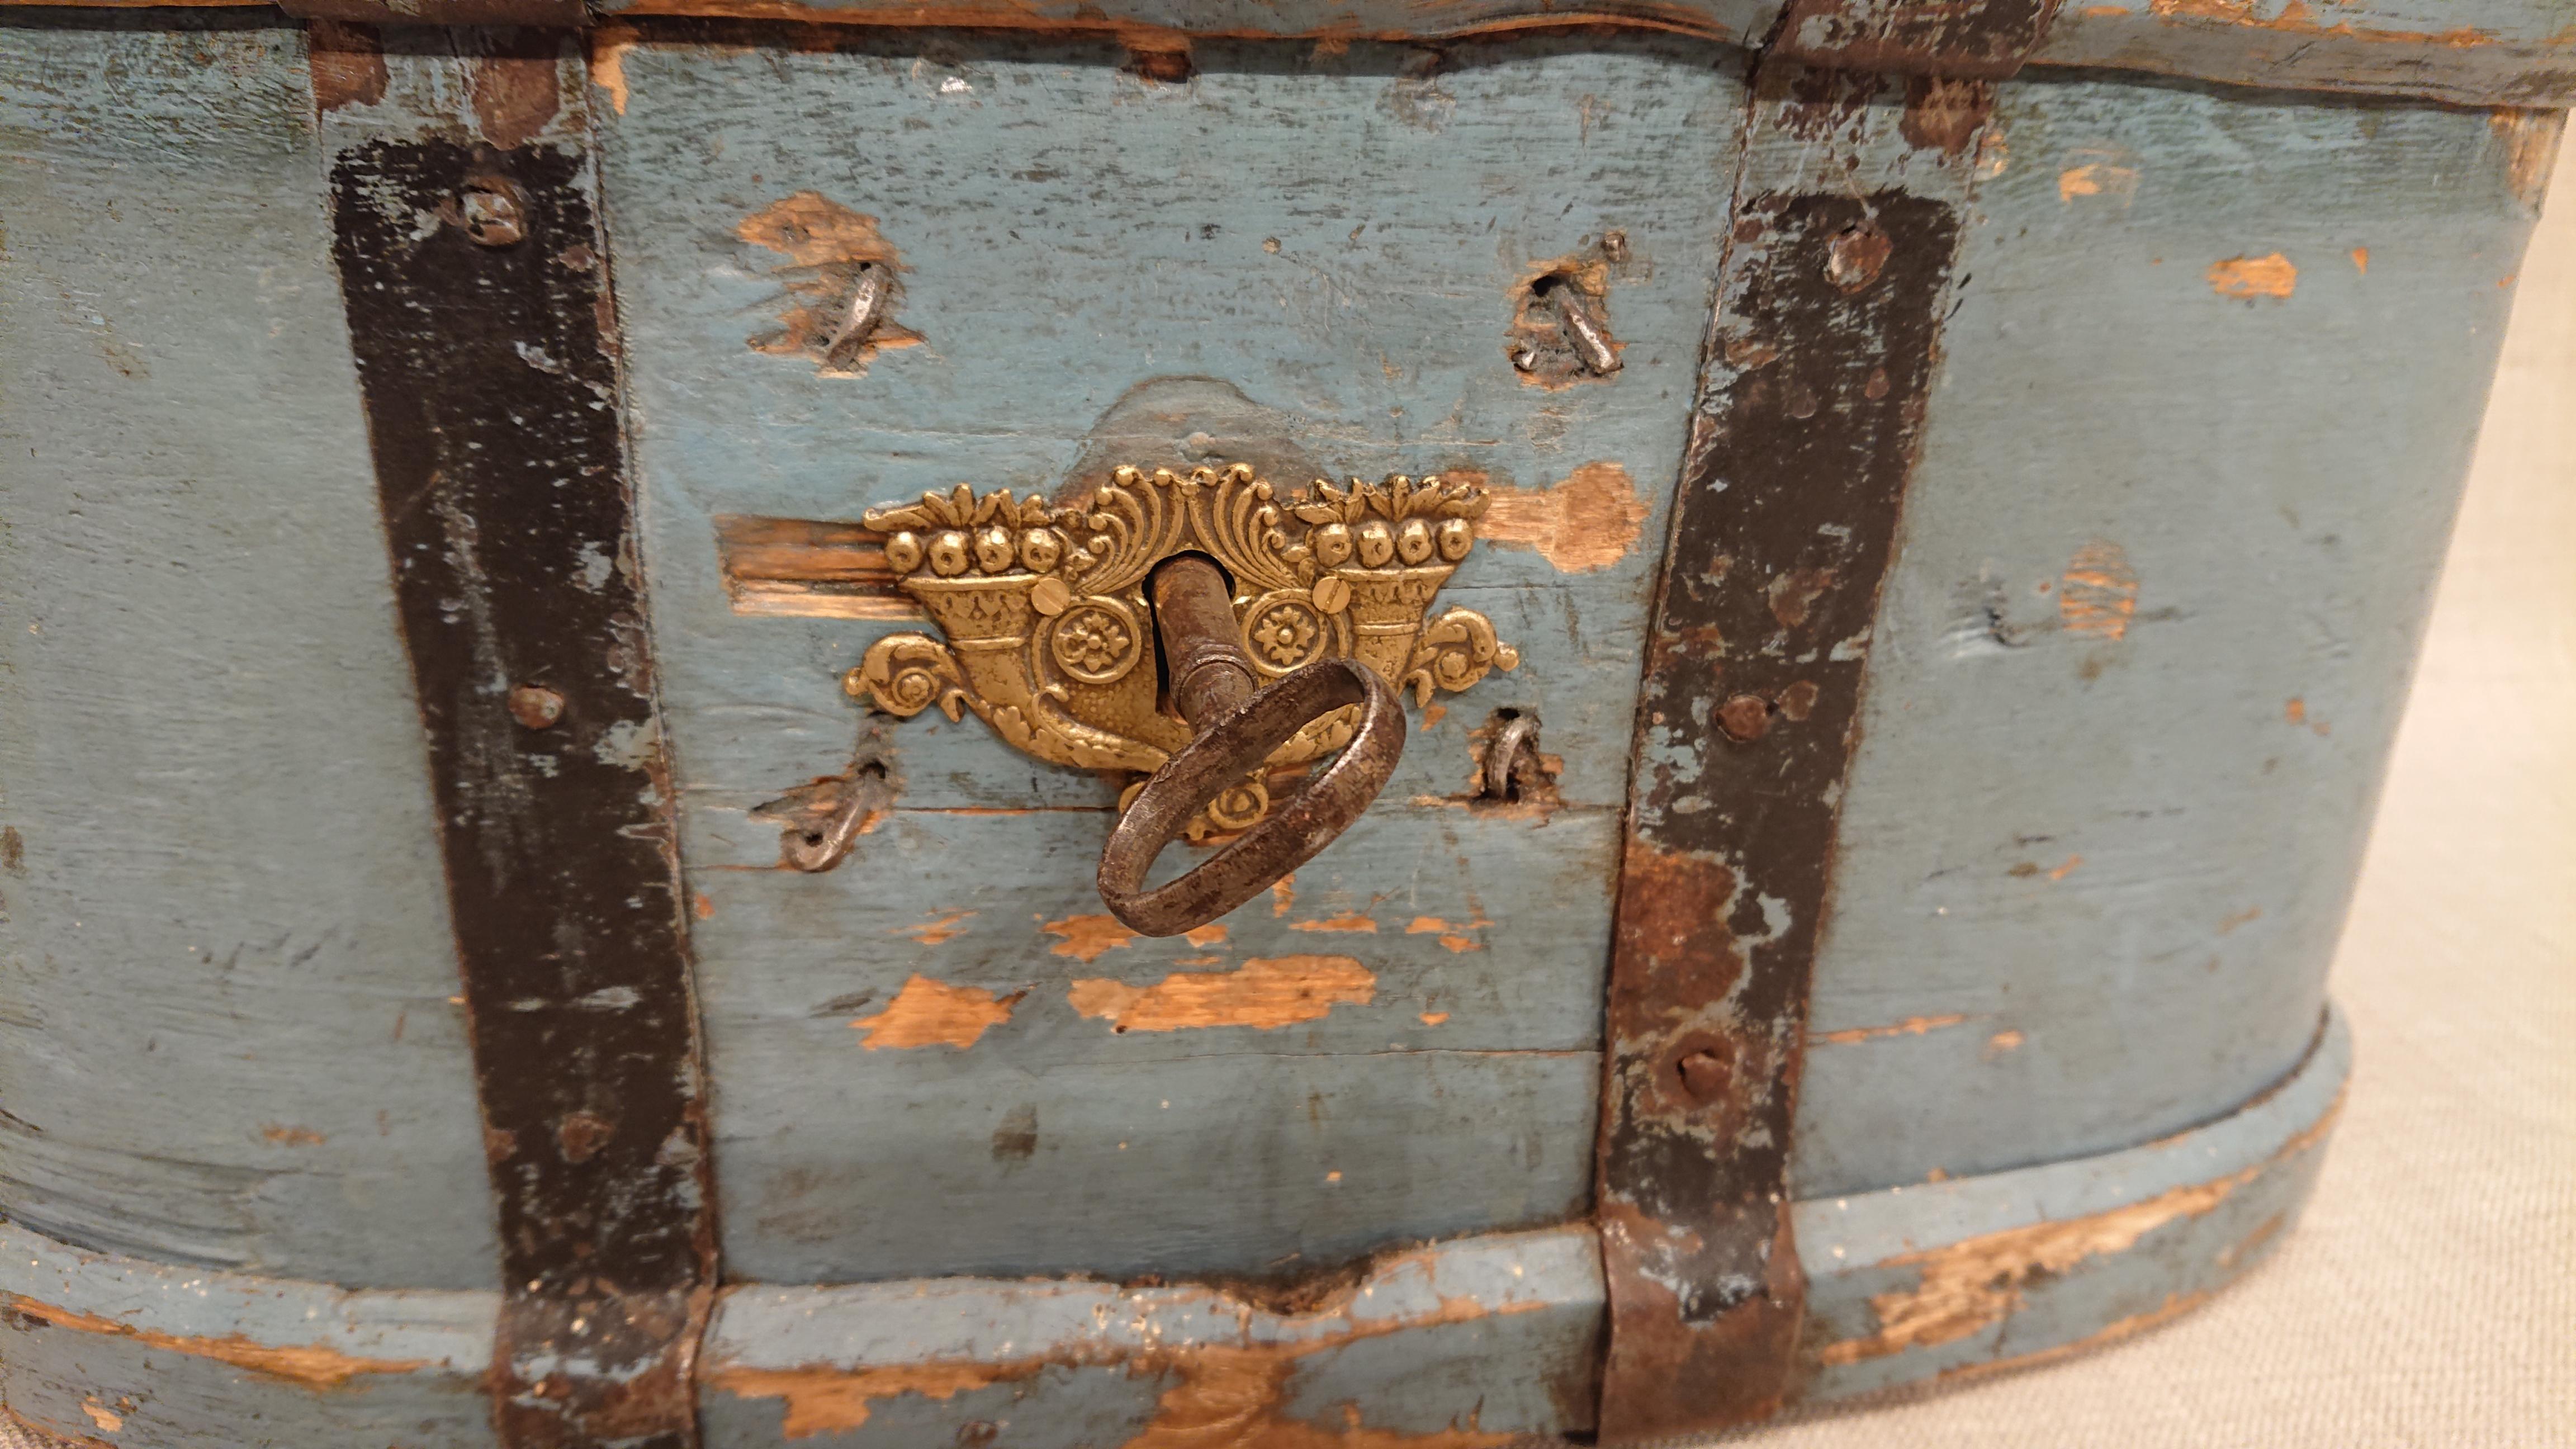 Early 19th Century Swedish Folk Art Travel box from Skelleftea Vasterbotten ,Northern Sweden.
Beautiful untouched original paint.
Decorated with handwrought iron around the box and over the lid.
Working lock and key.
Later hard ware from Empire